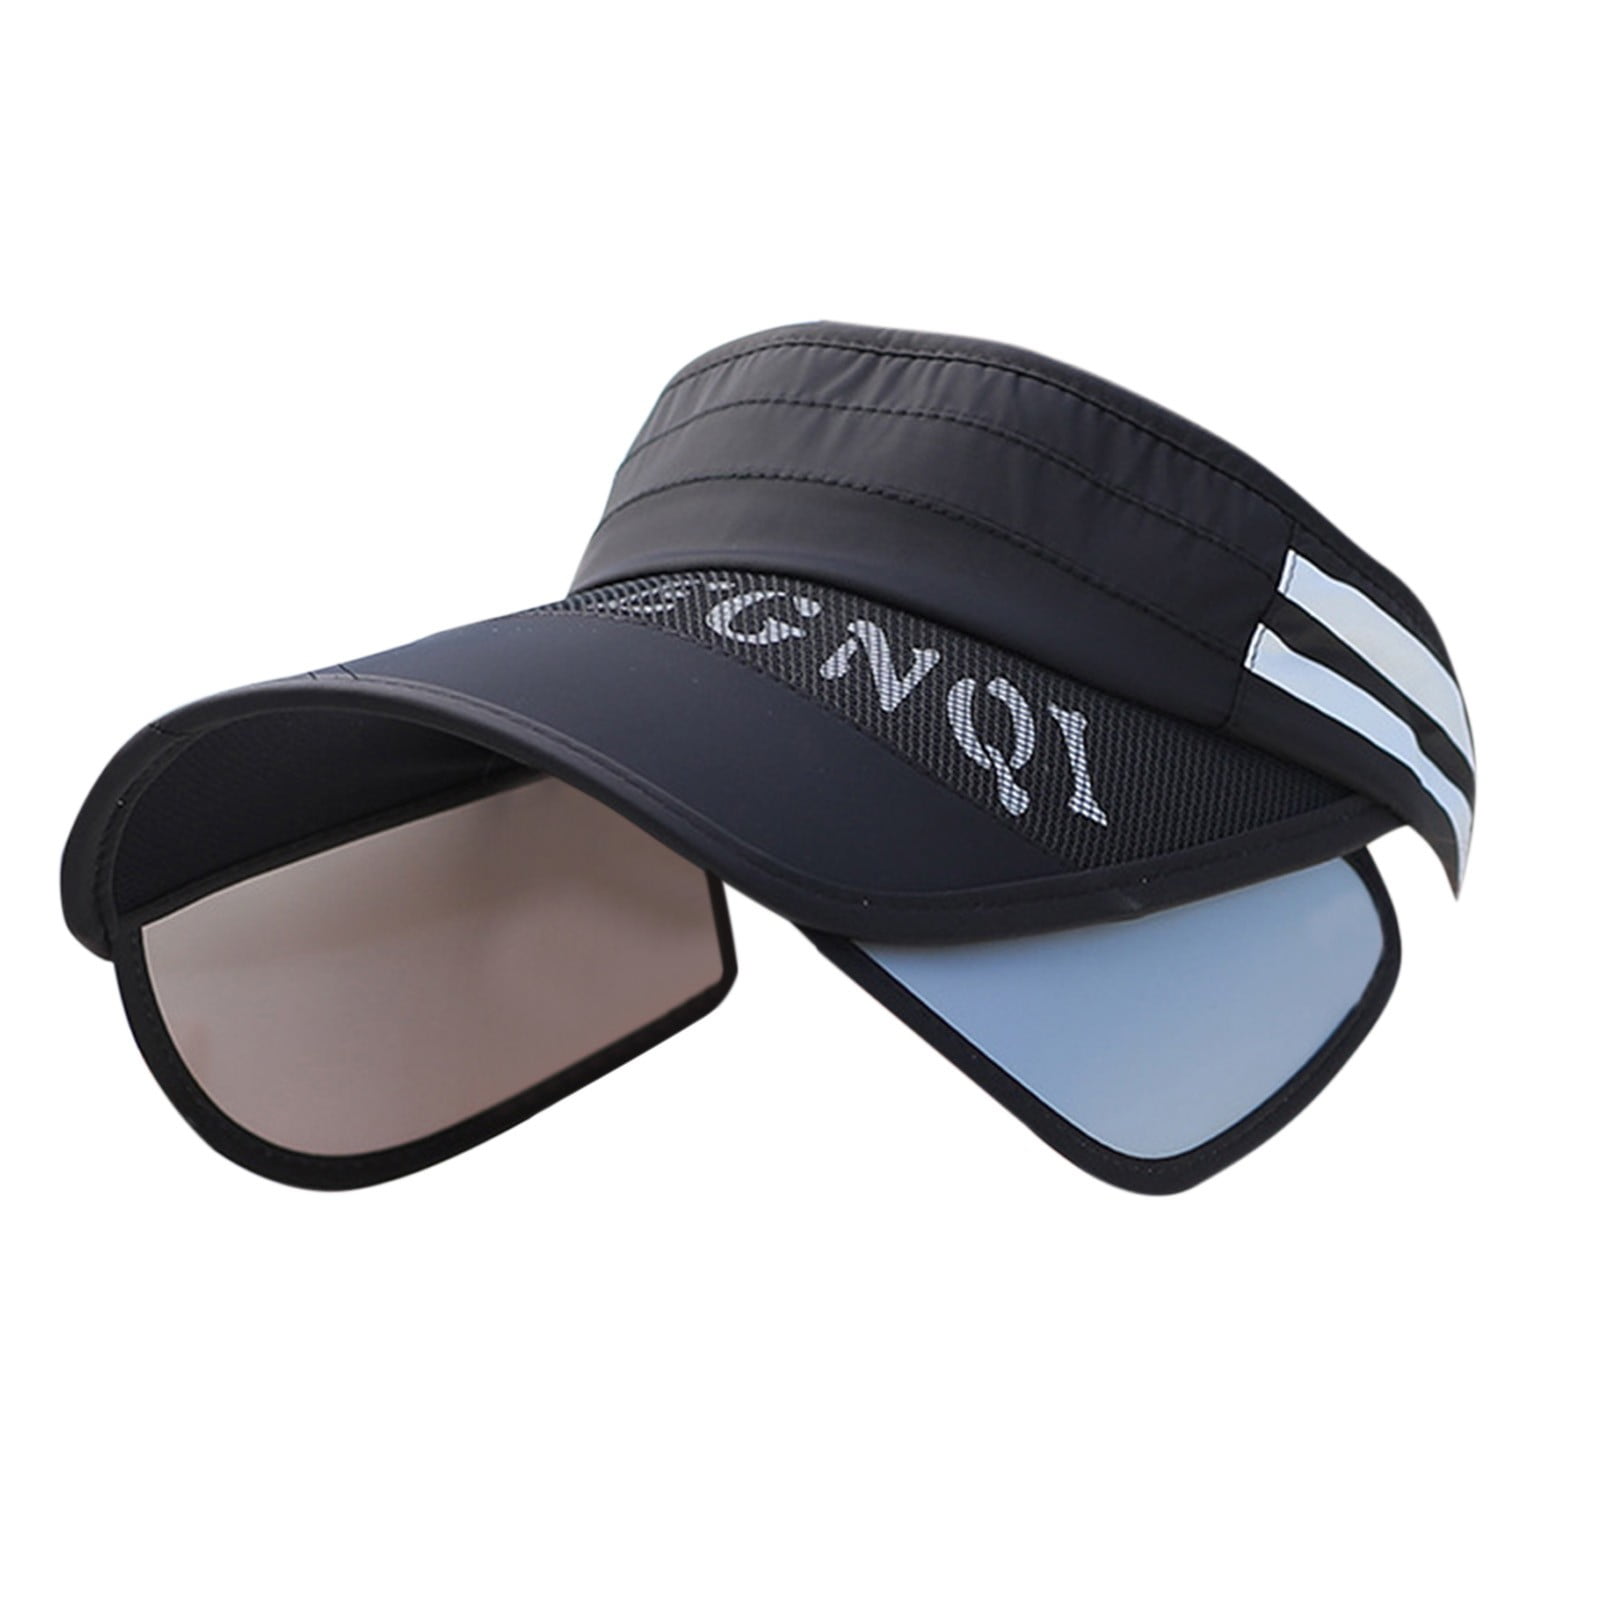 Tennis Empty Top Ladies New Fashion Visor Summer Outdoor Protection Hat Male Beach Hat: Buy Online At Best Price Snapdeal | Lady Empty Top Outdoor Sports Peaked Cap Students